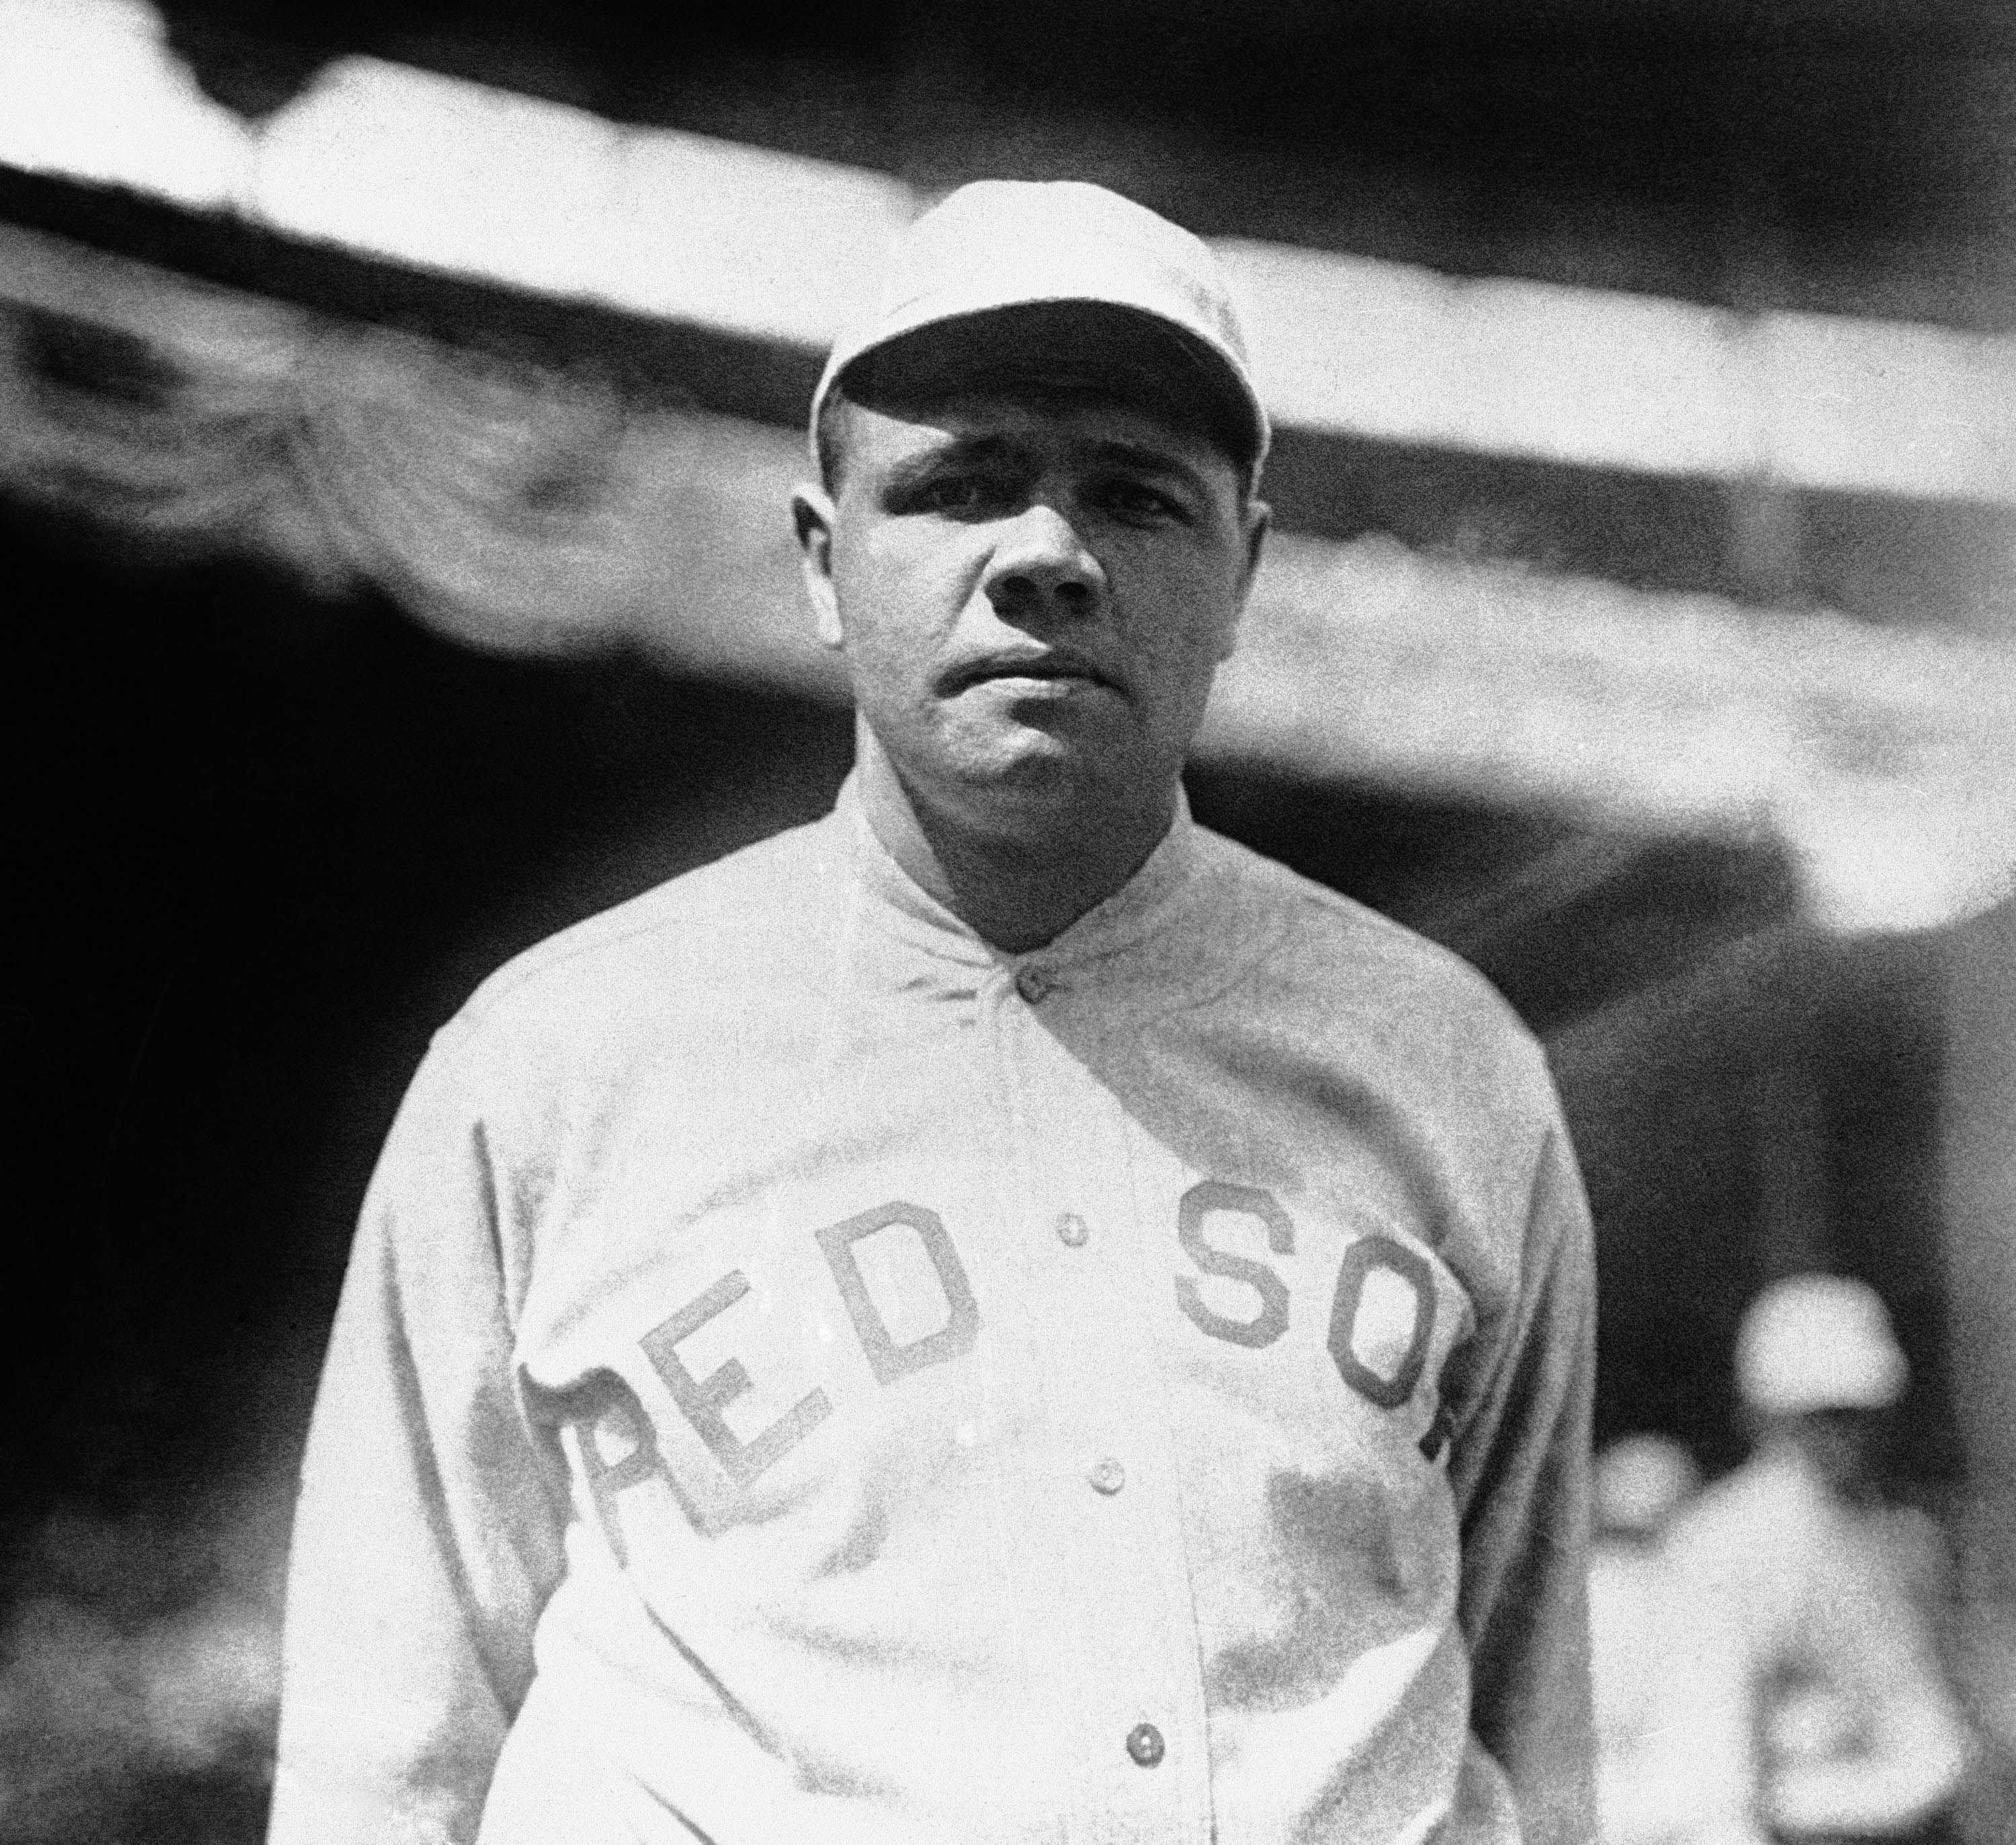 The baseball legend Babe Ruth | The Spokesman-Review